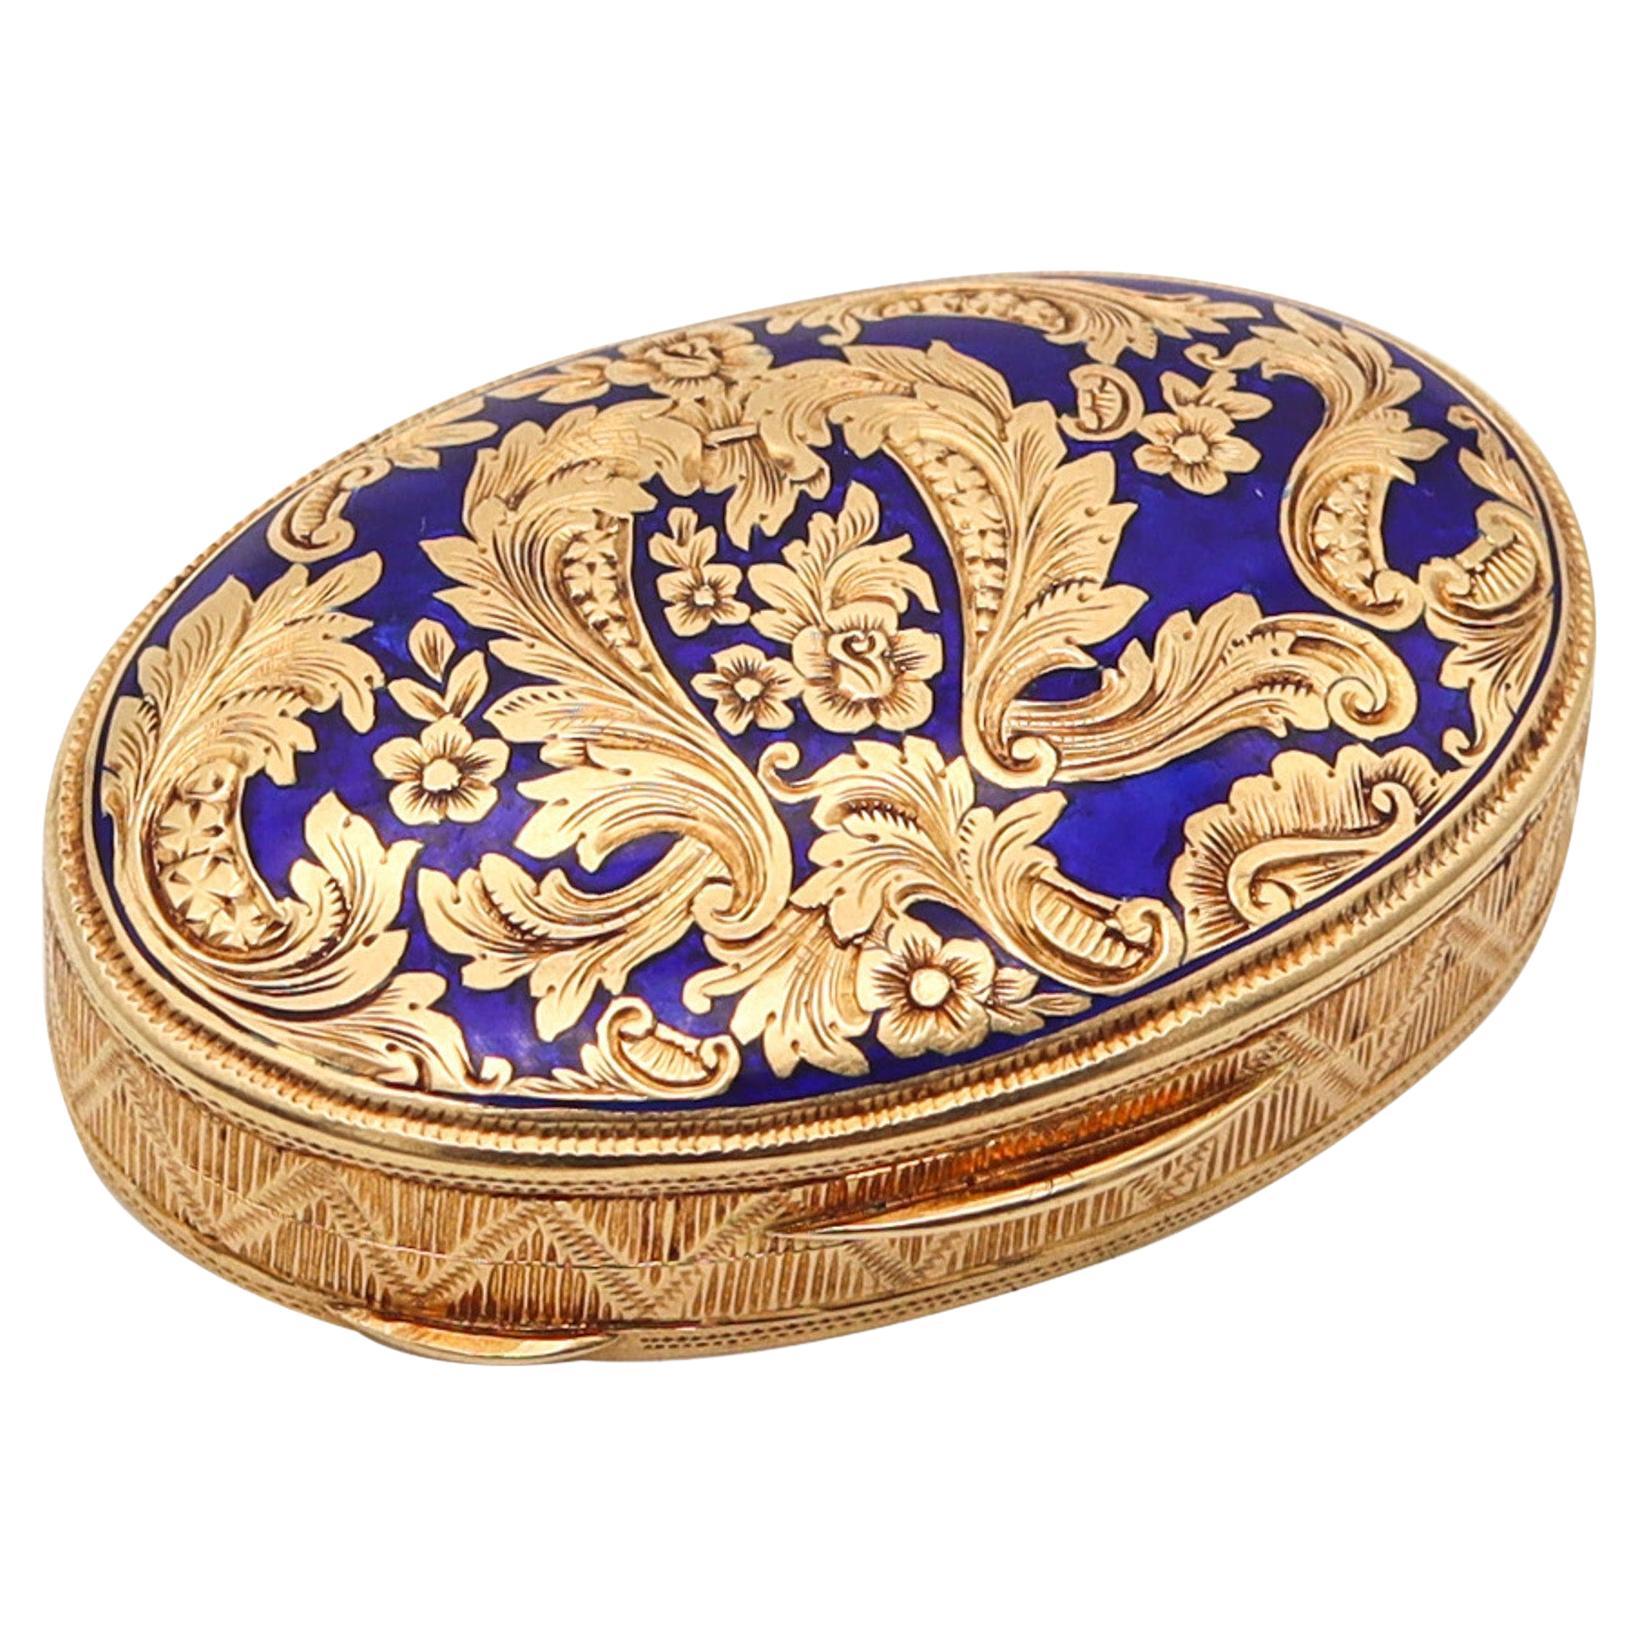 European 1930 Baroque Revival Blue Enameled Pill Box In Solid 18Kt yellow Gold